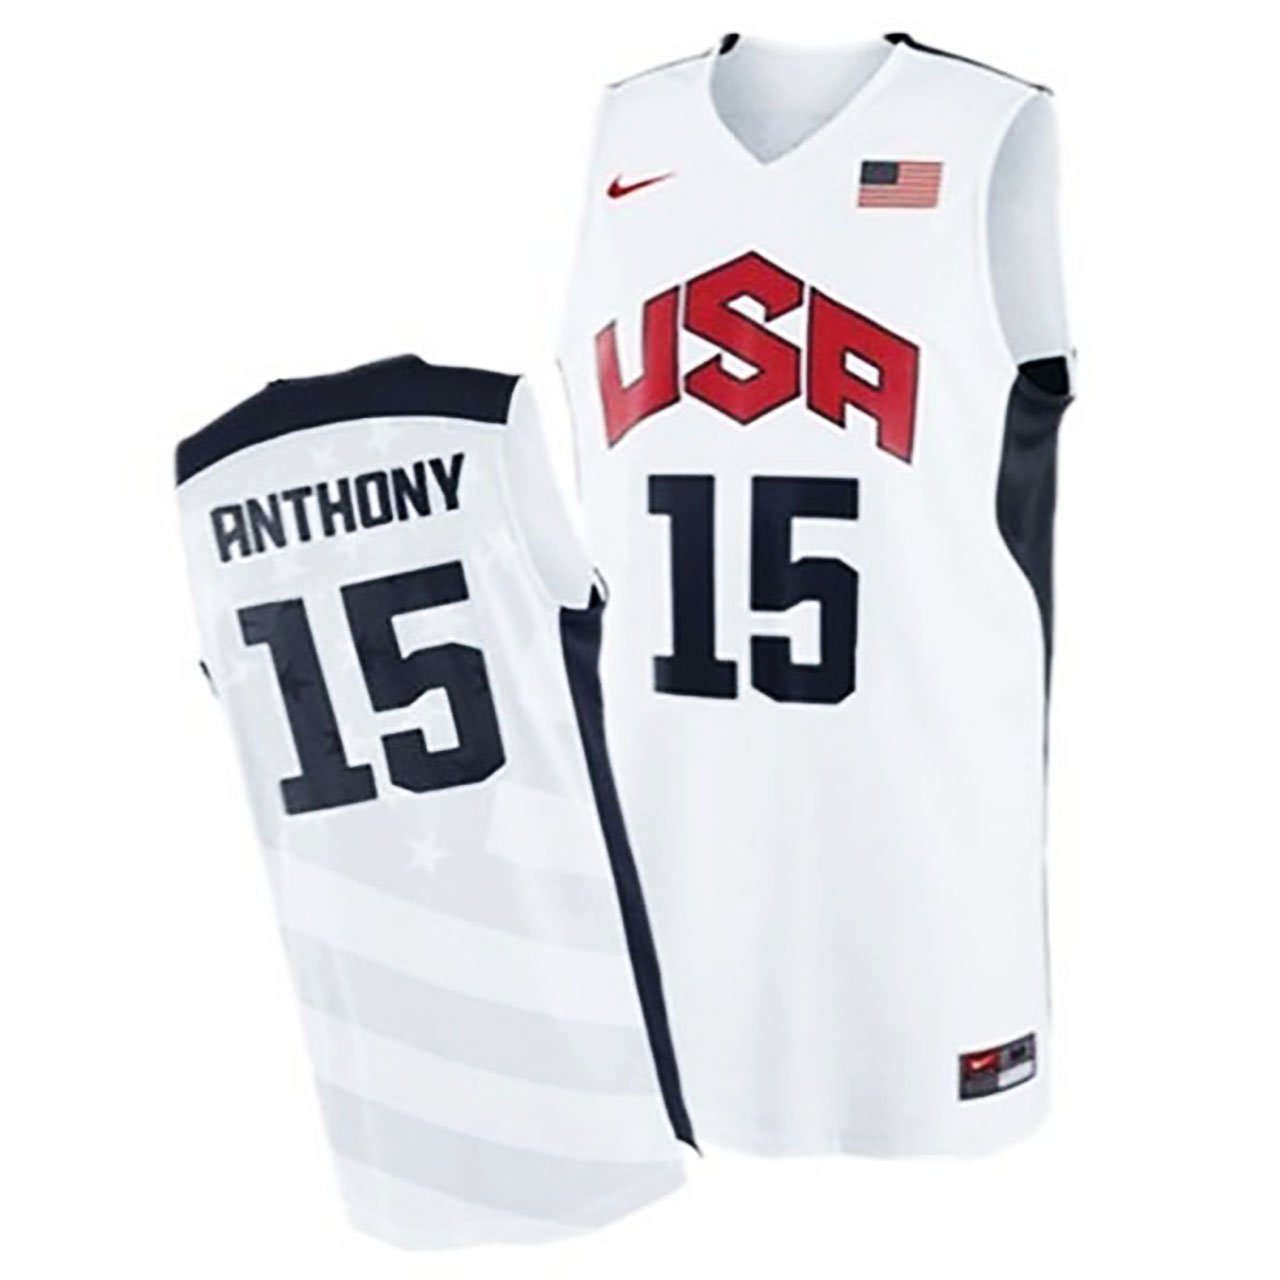 Carmelo Anthony 2012 USA Dream Team 15 White Stitched Jersey